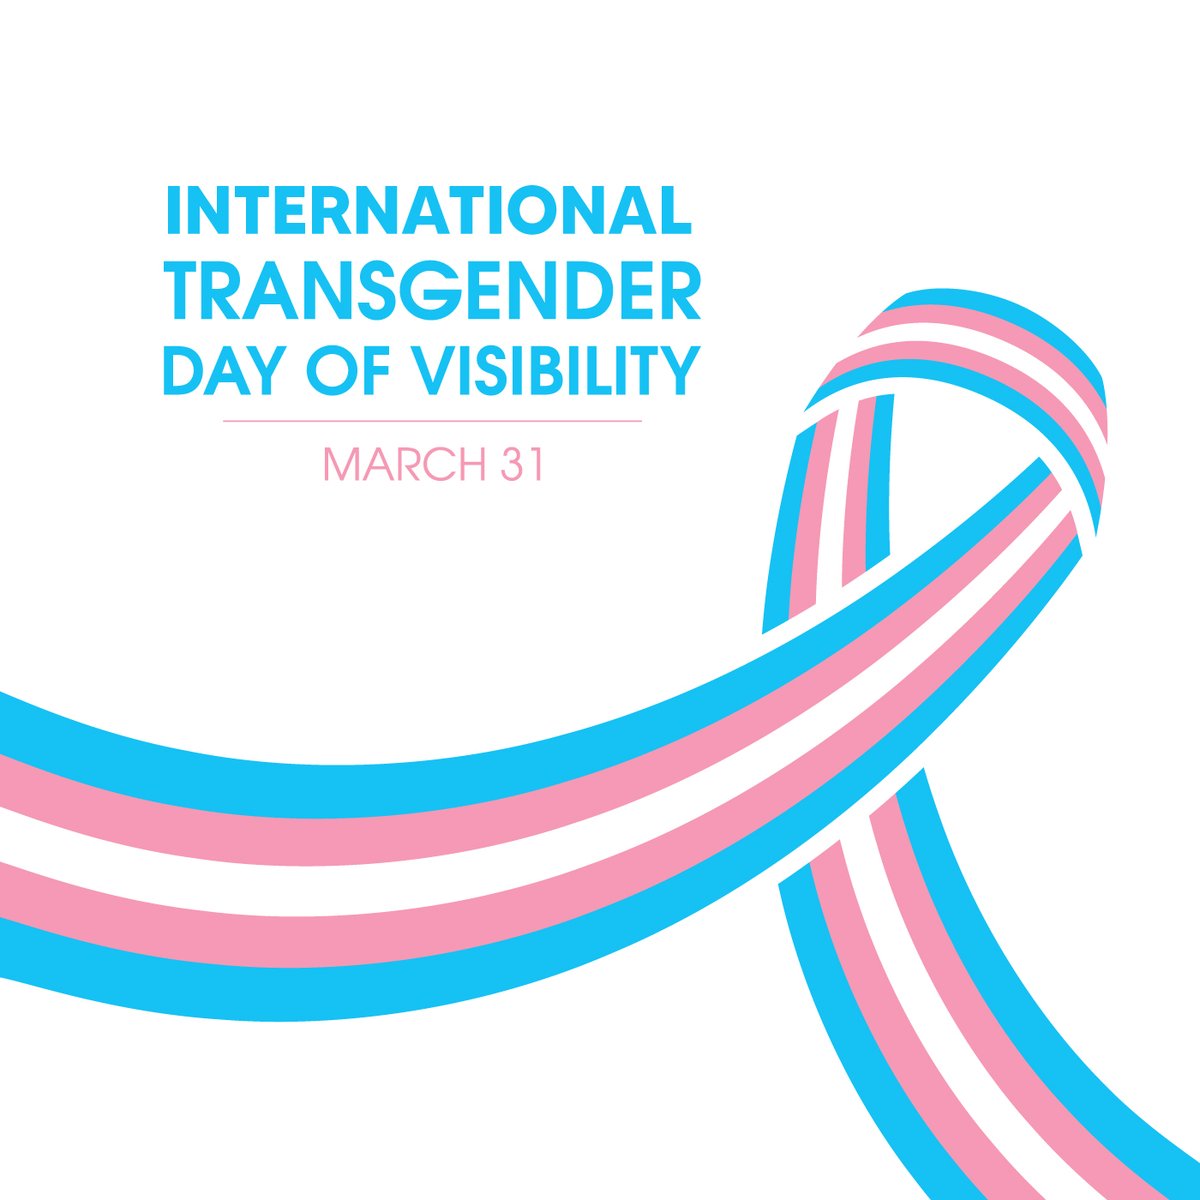 Today, we celebrate and support transgender individuals worldwide. Let's work together for a more inclusive world that respects diversity. 
#EquityAndInclusion #QualityEducationForAll #CMEC_CndEdu